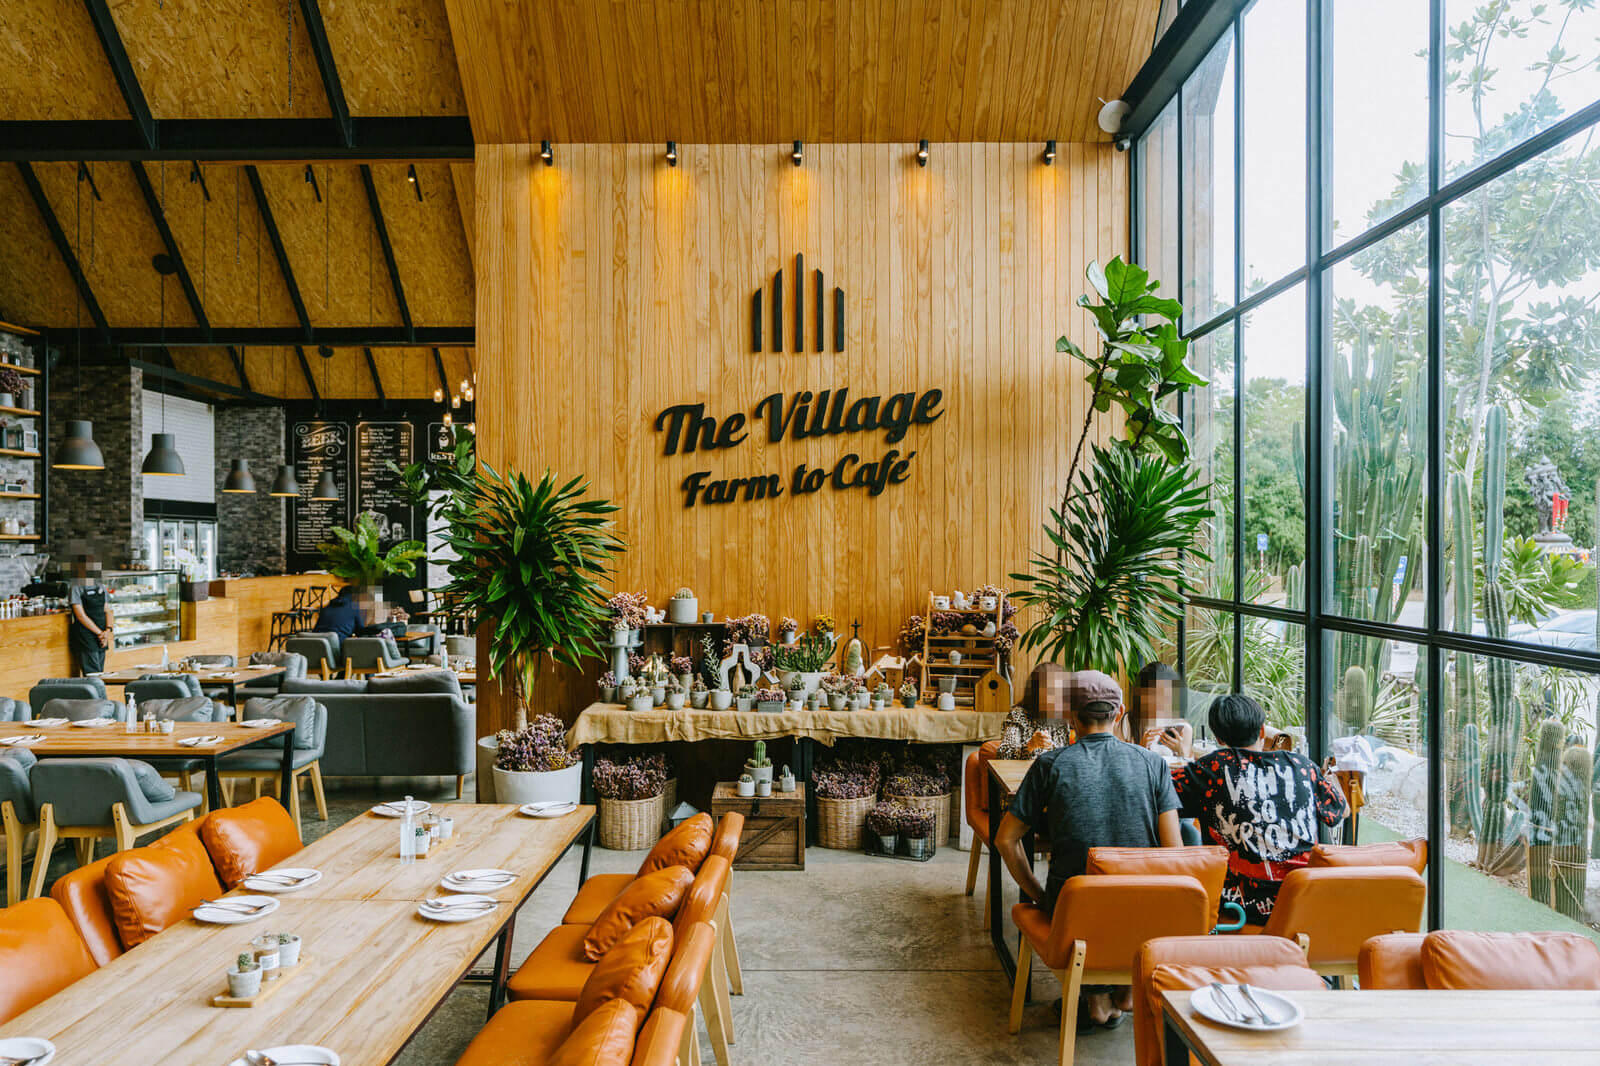 the-village-farm-to-cafe